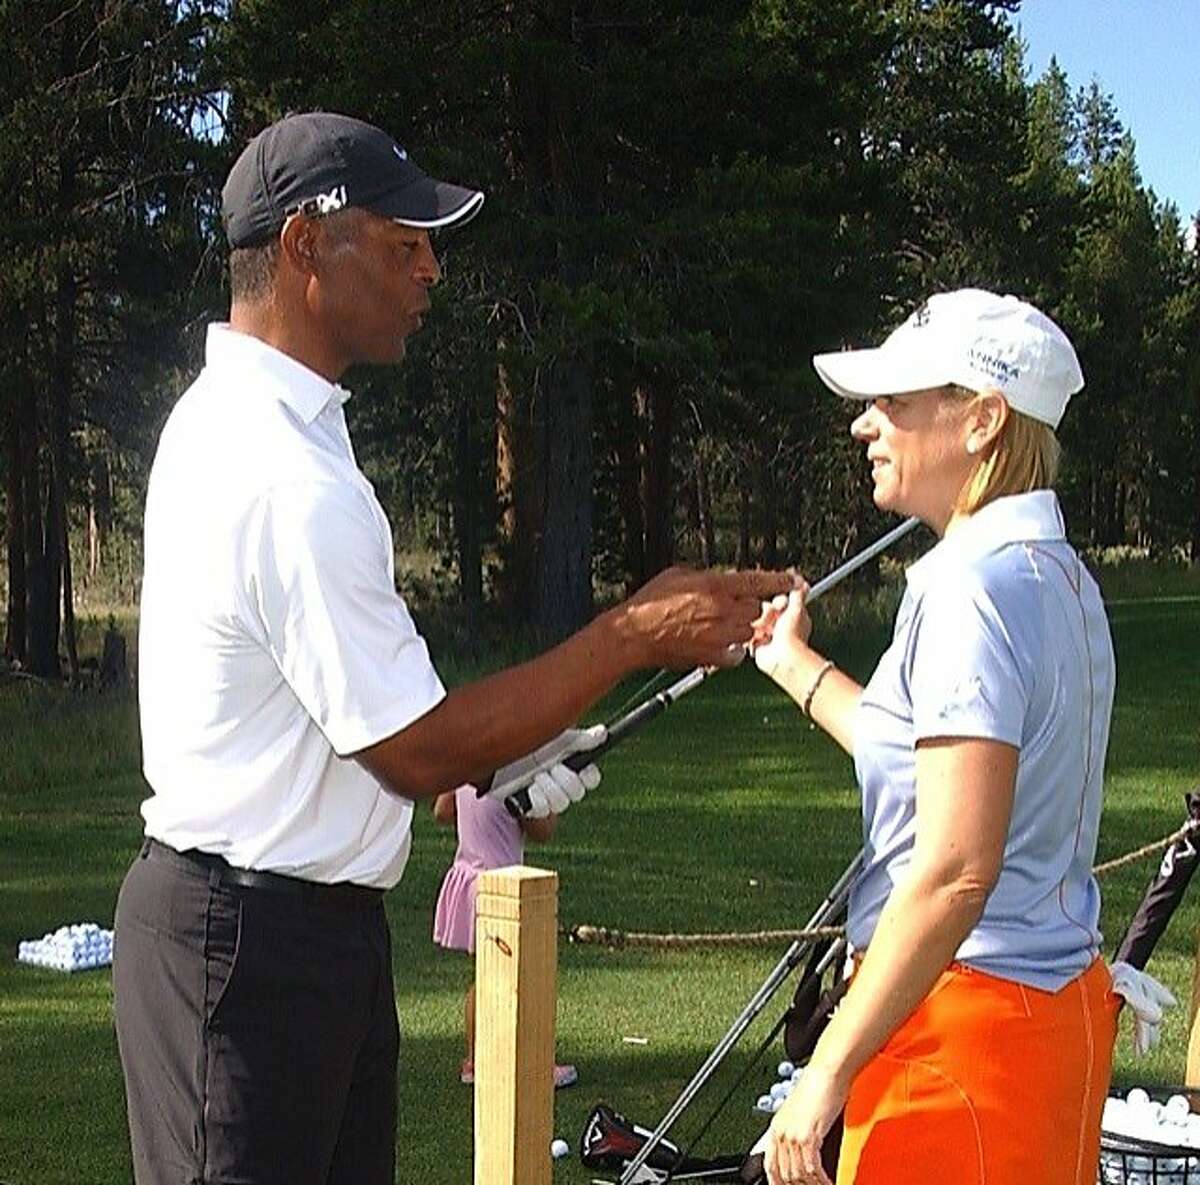 Retired LPGA great Annika Sorenstam gives some coaching tips to former Raider running back Marcus Allen. Friends and colleagues of former Raider player and coach Gene Upshaw gathered in Lake Tahoe for a benefit golf tournament to raise money for brain injury research and Upshaw's cancer treatment center.